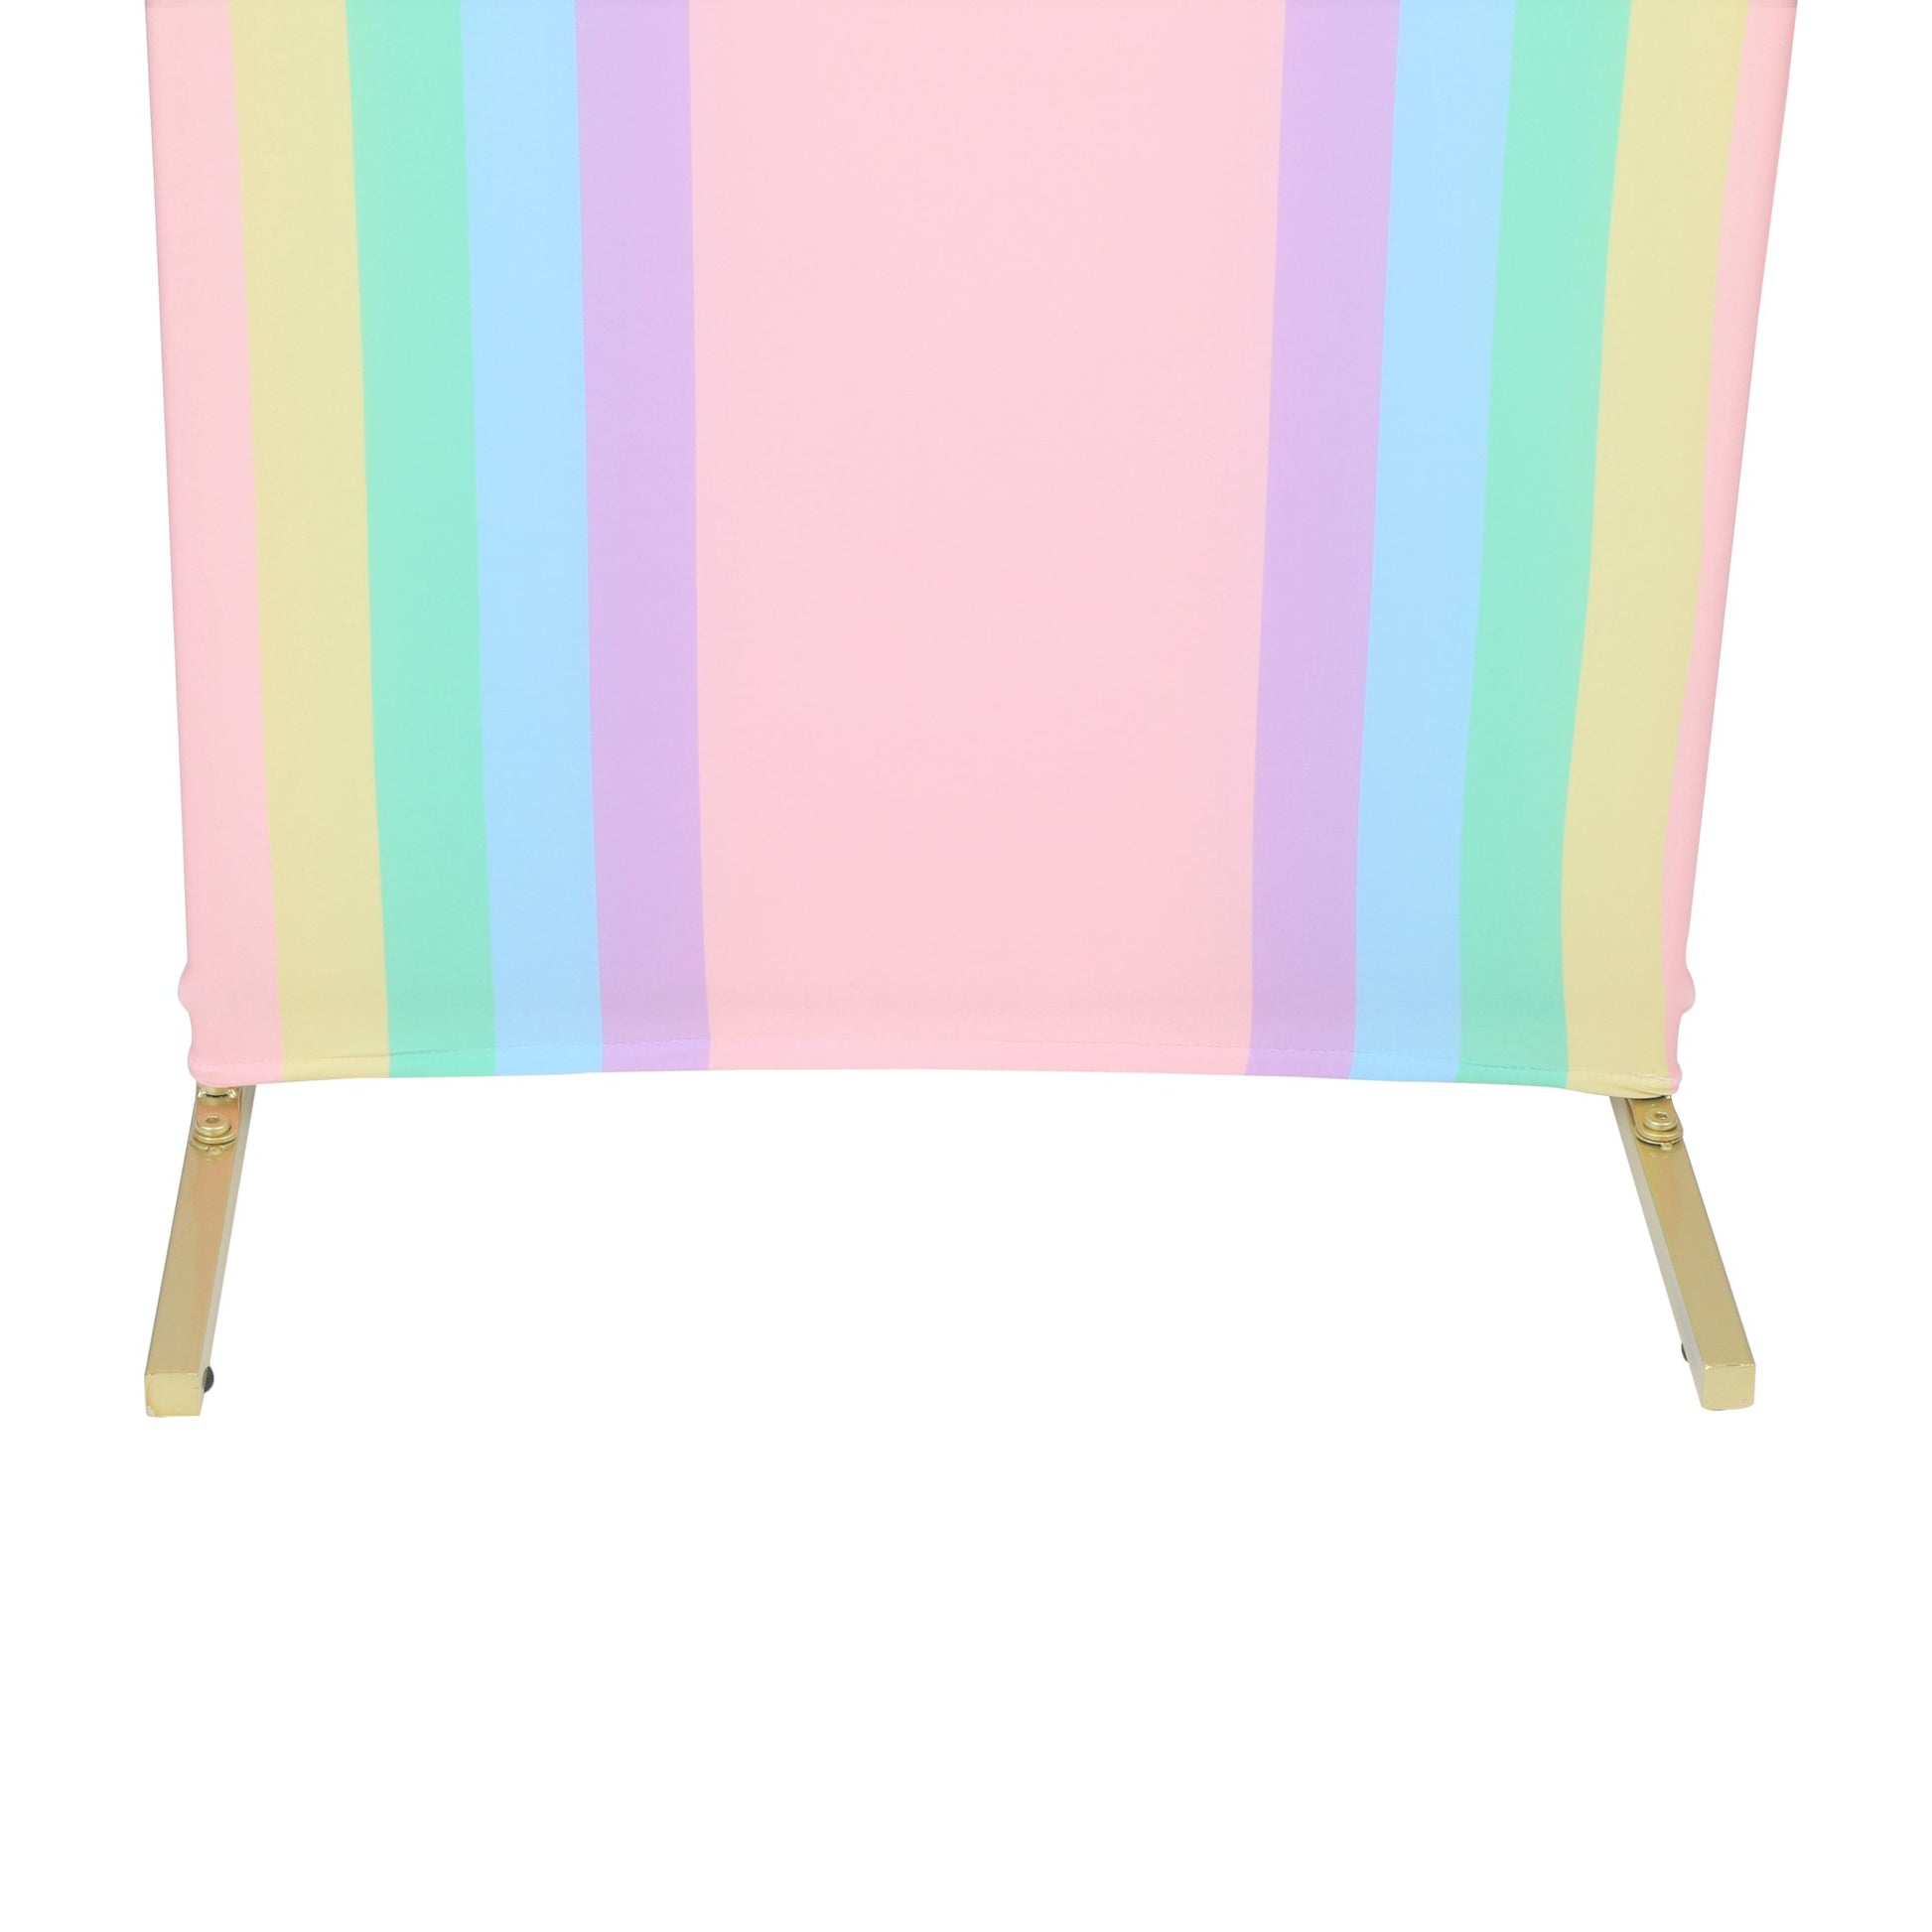 Pastel Rainbow Arch Cover for Kids Birthday Party Backdrop Decoration –  sensfunbackdrops